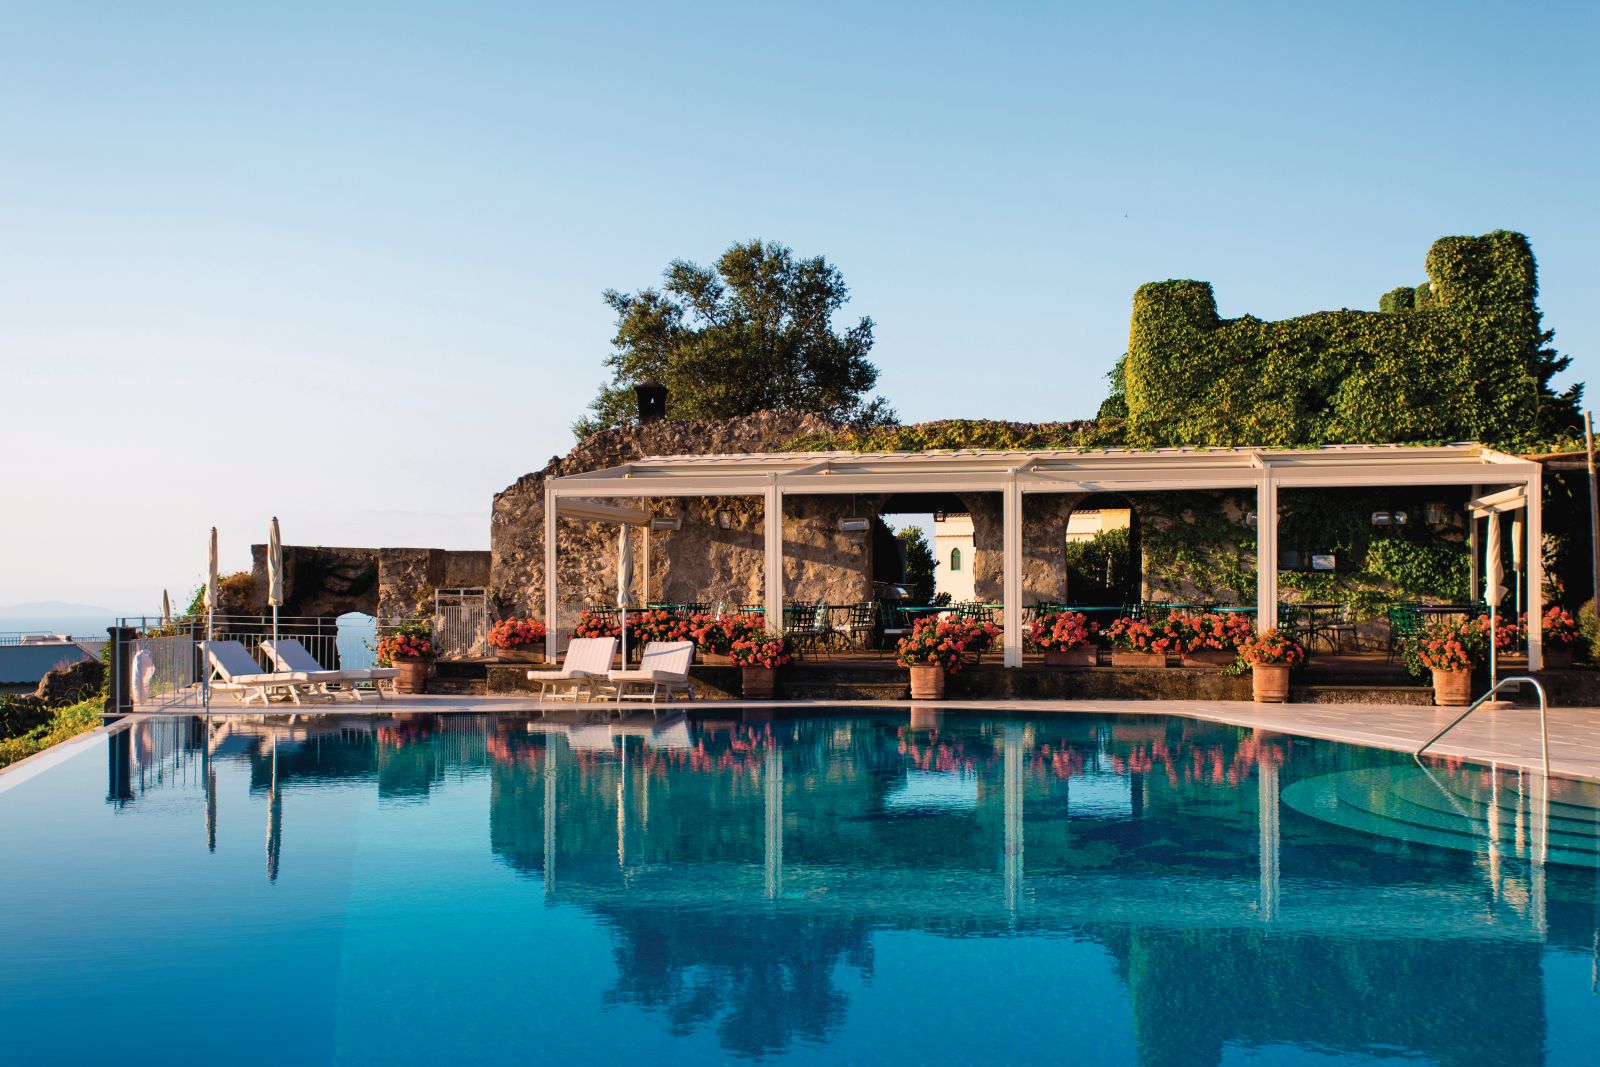 The swimming pool and terrace at Belmond Hotel Caruso in Ravello Italy